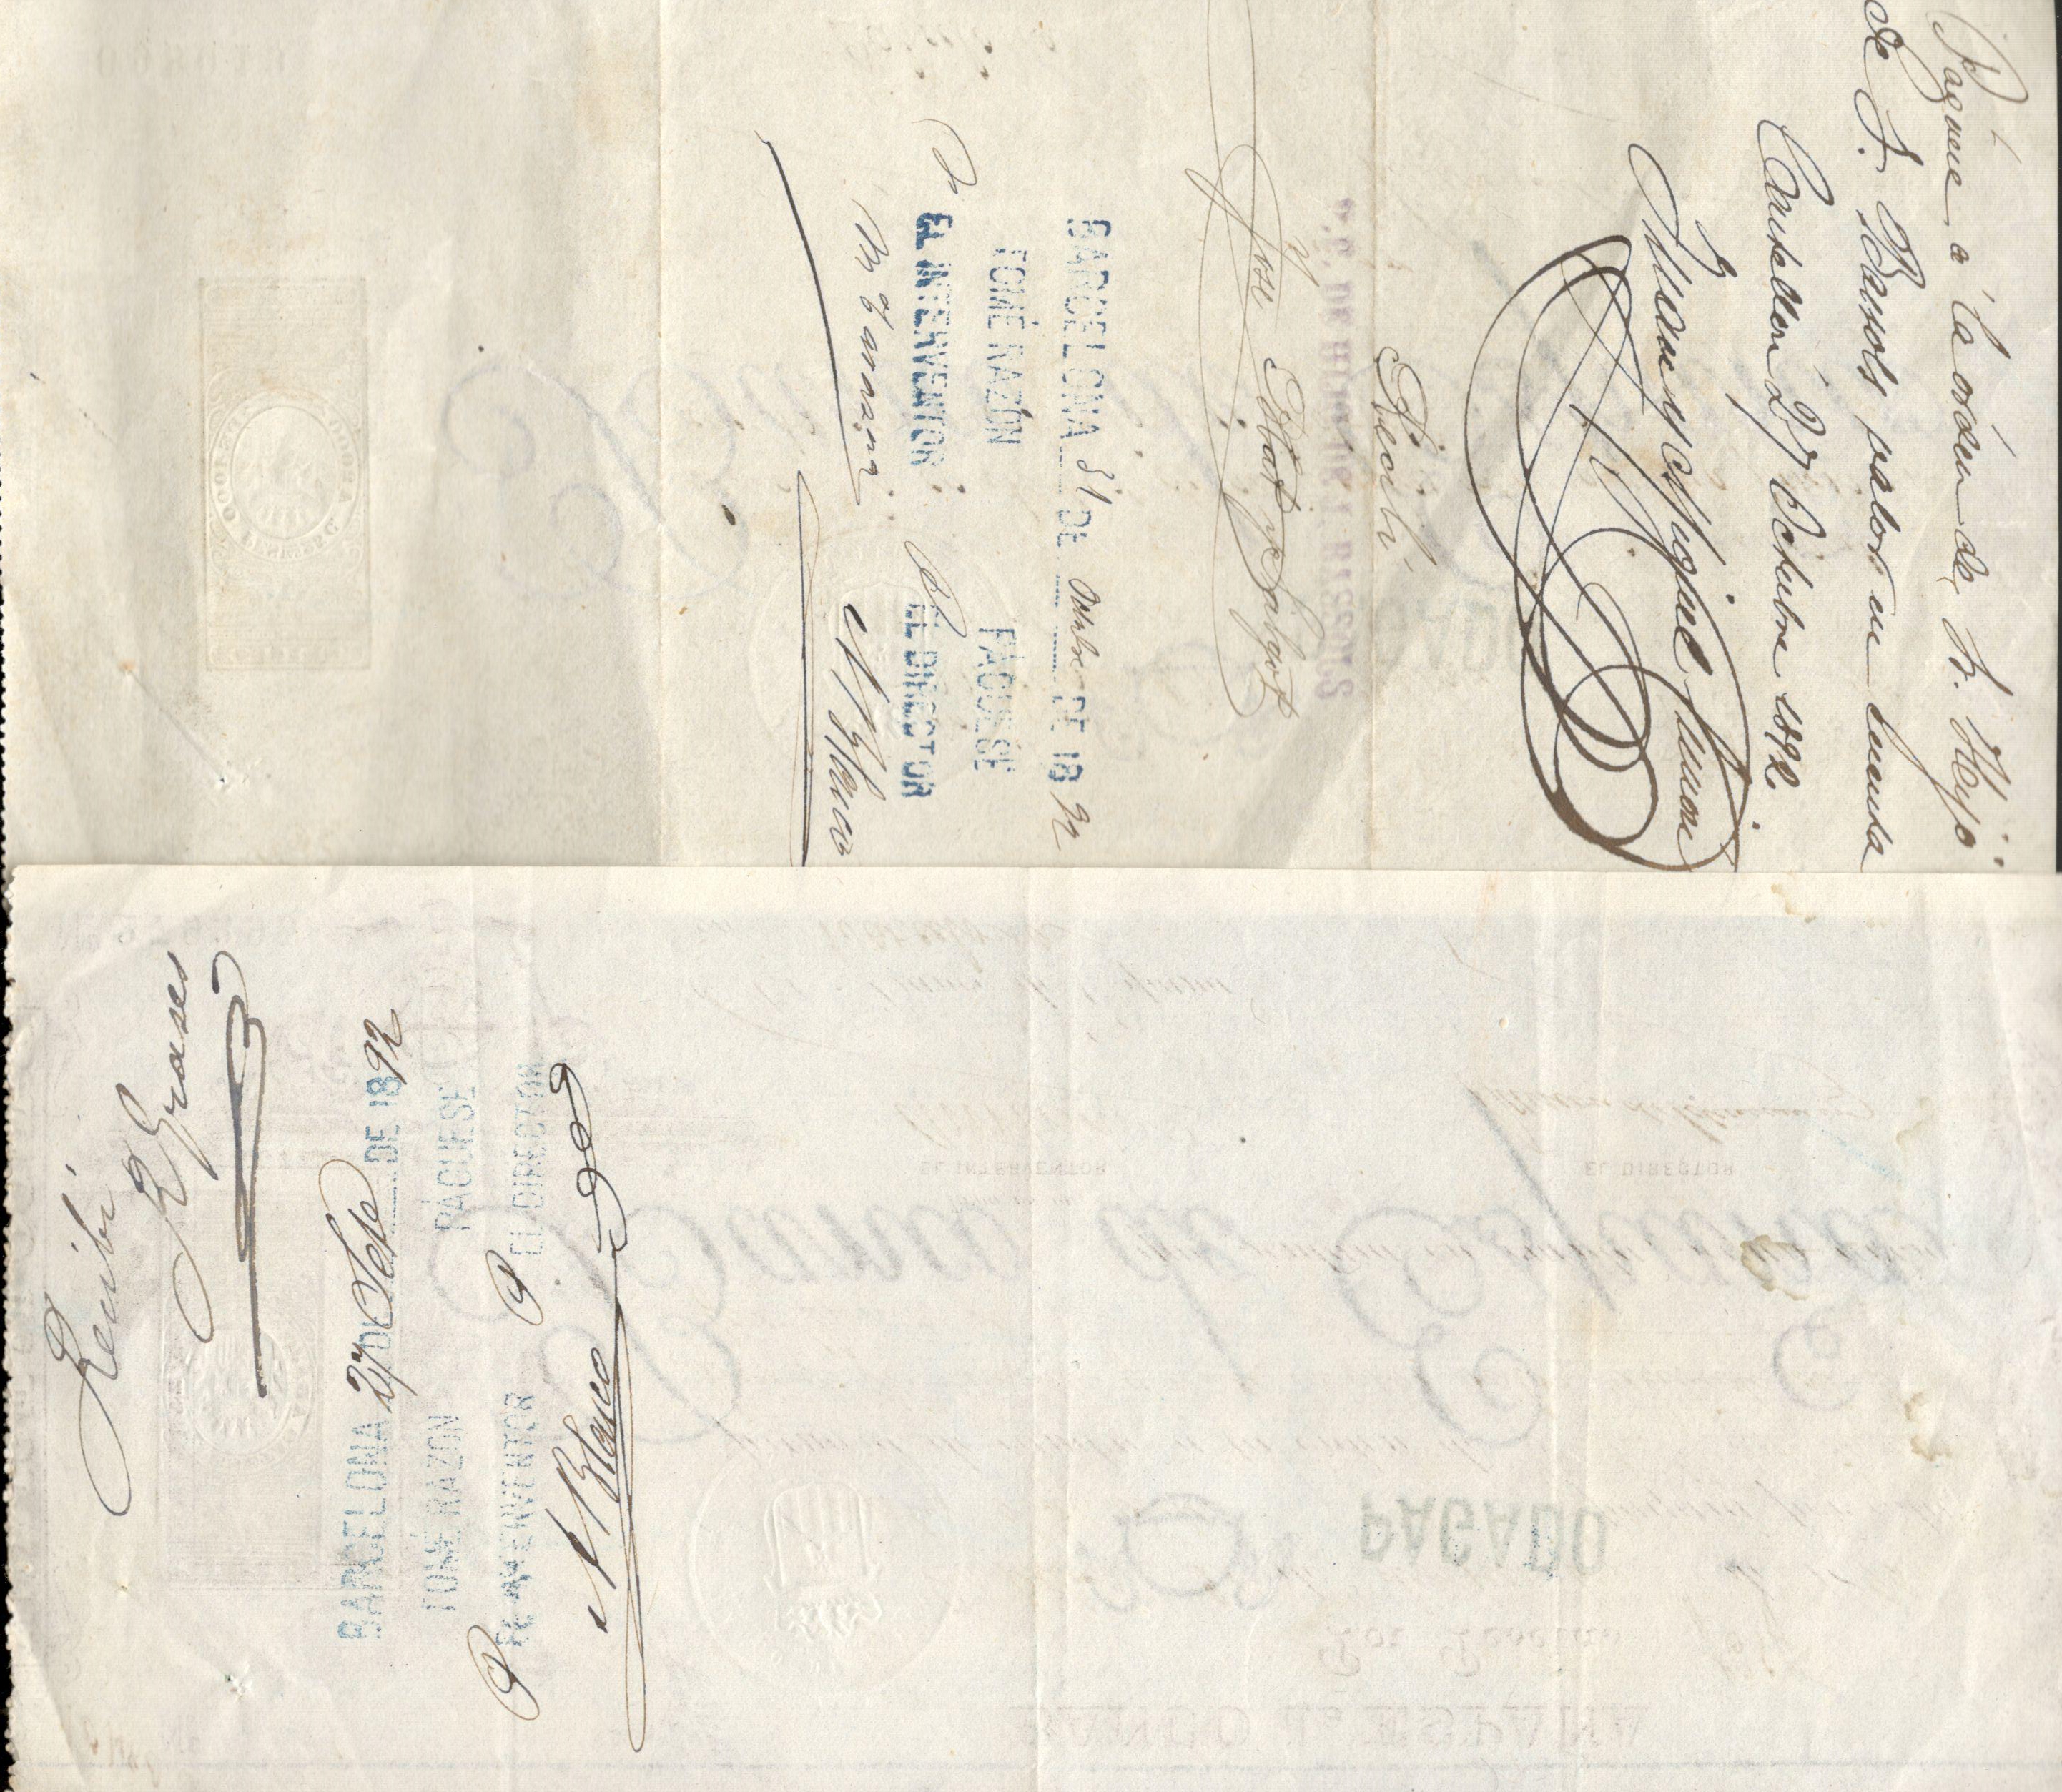 TWO EARLY SPANISH CHEQUES 1892 BANCO DE ESPANA STAMPED AND USED - Image 2 of 2